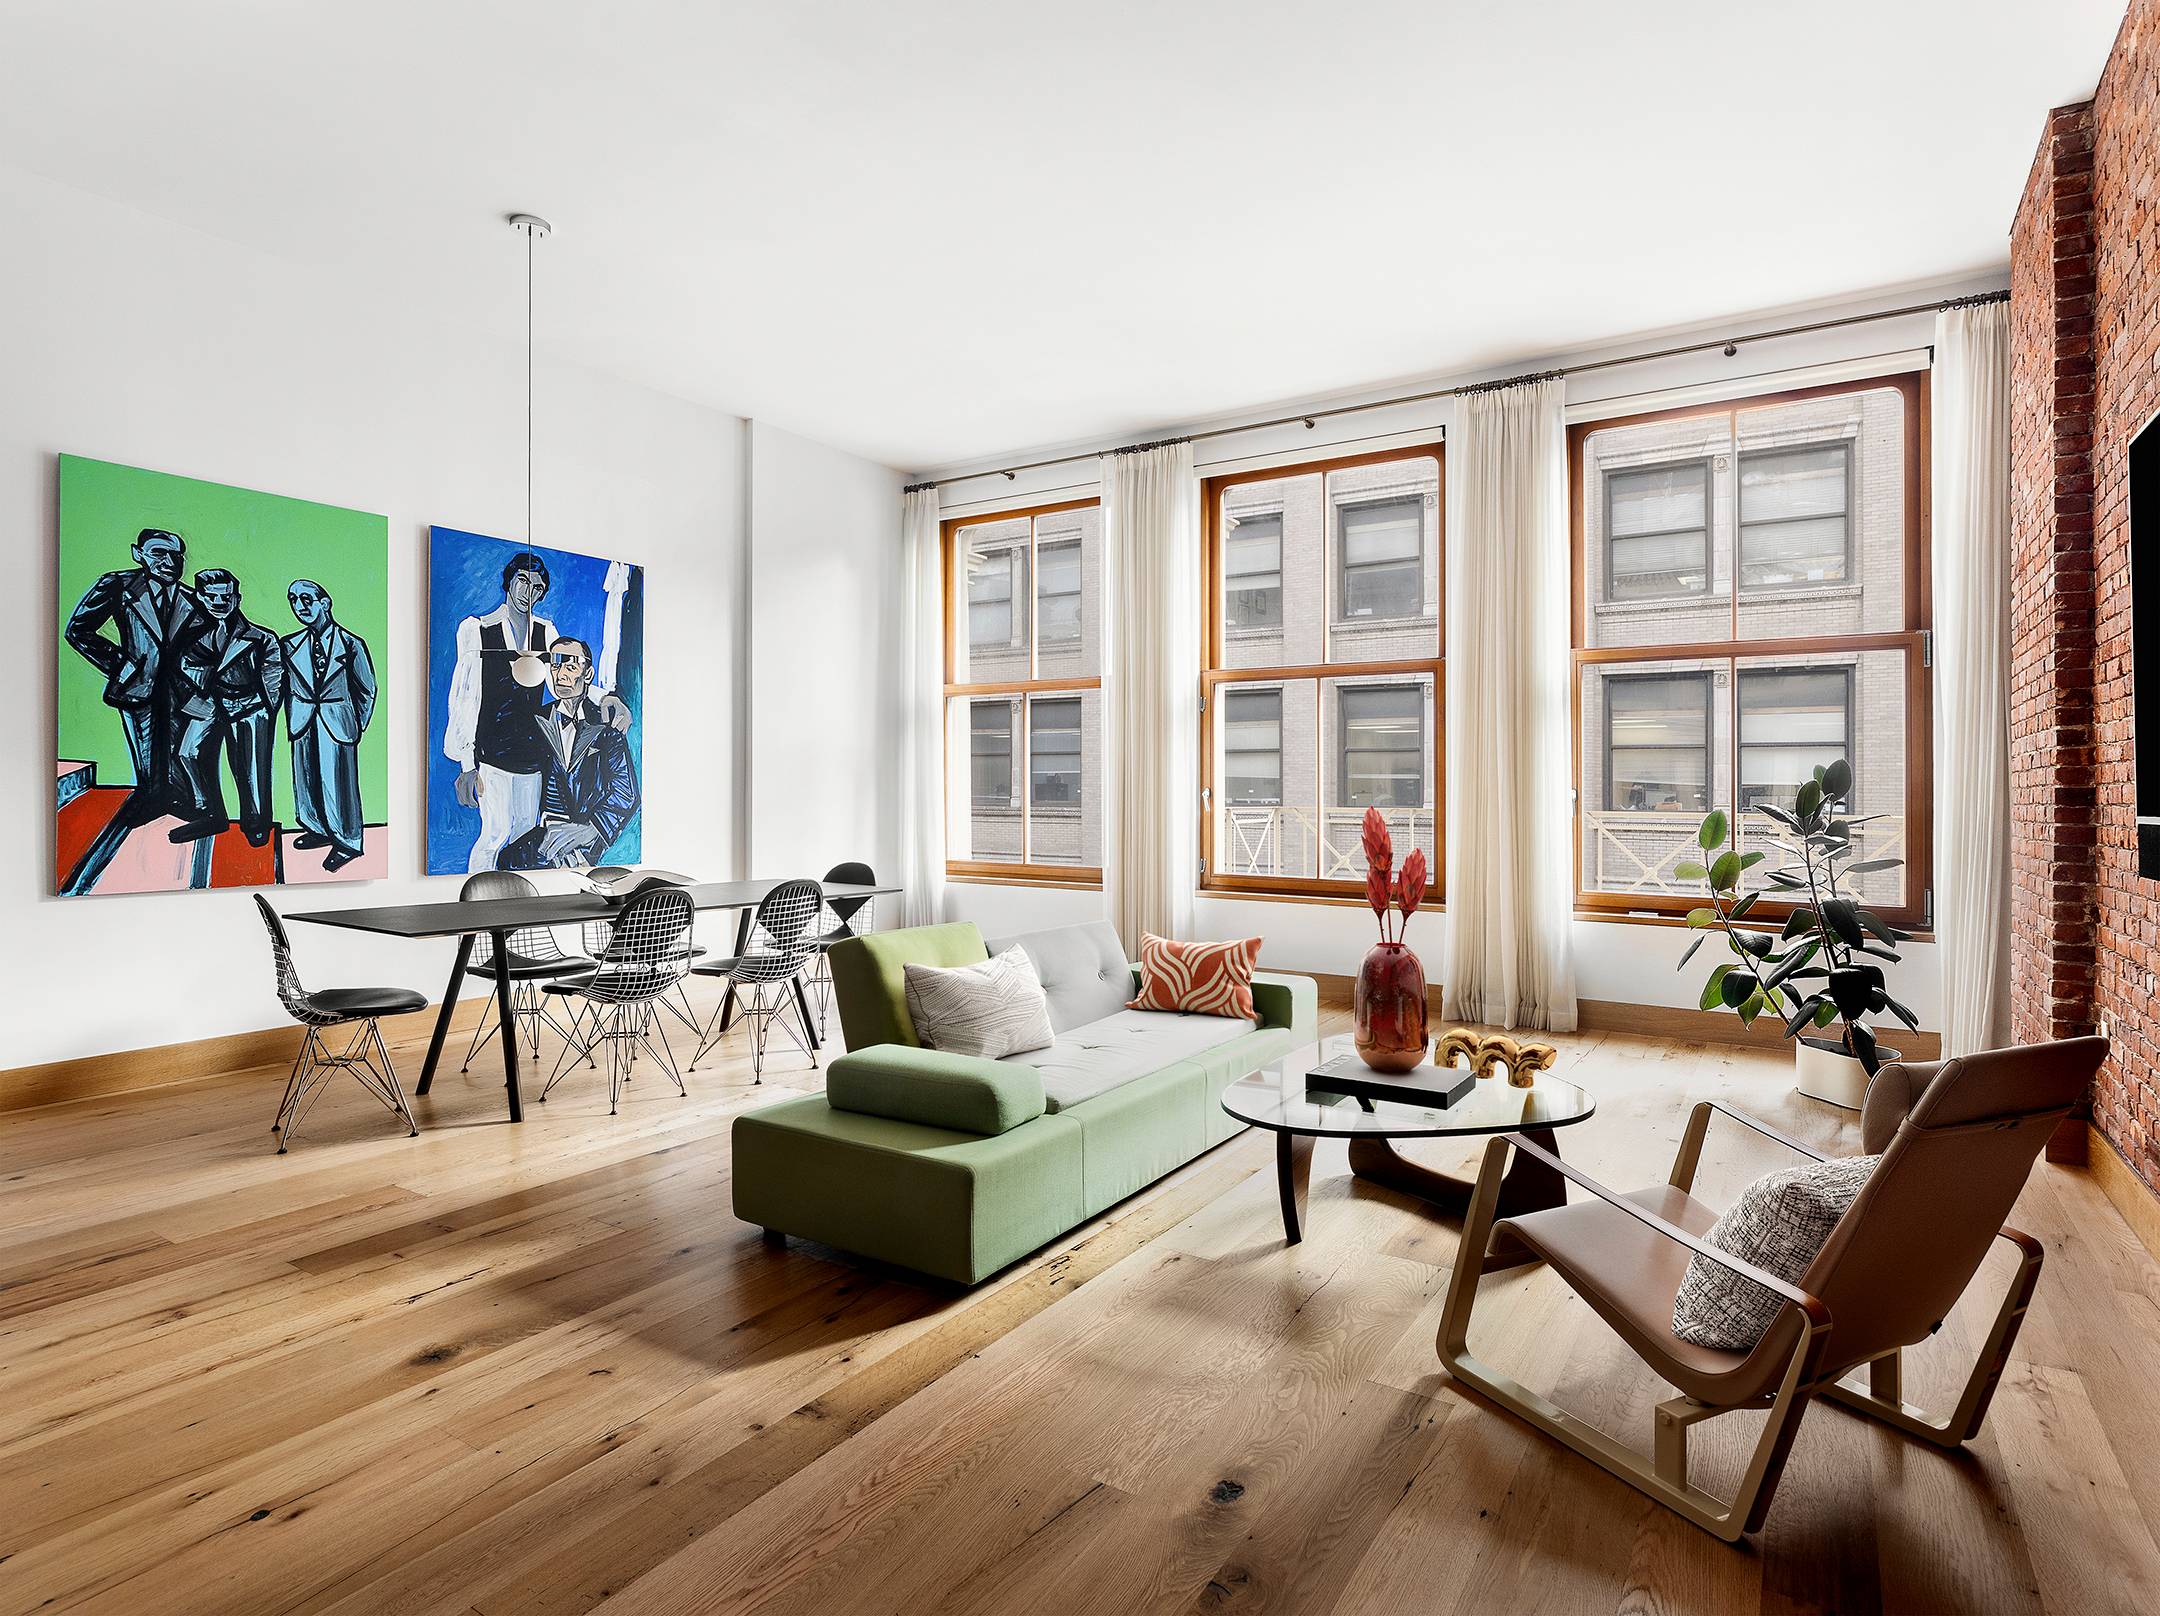 Perfectly situated in the center of Downtown Manhattan, this nearly 2, 000 sq.